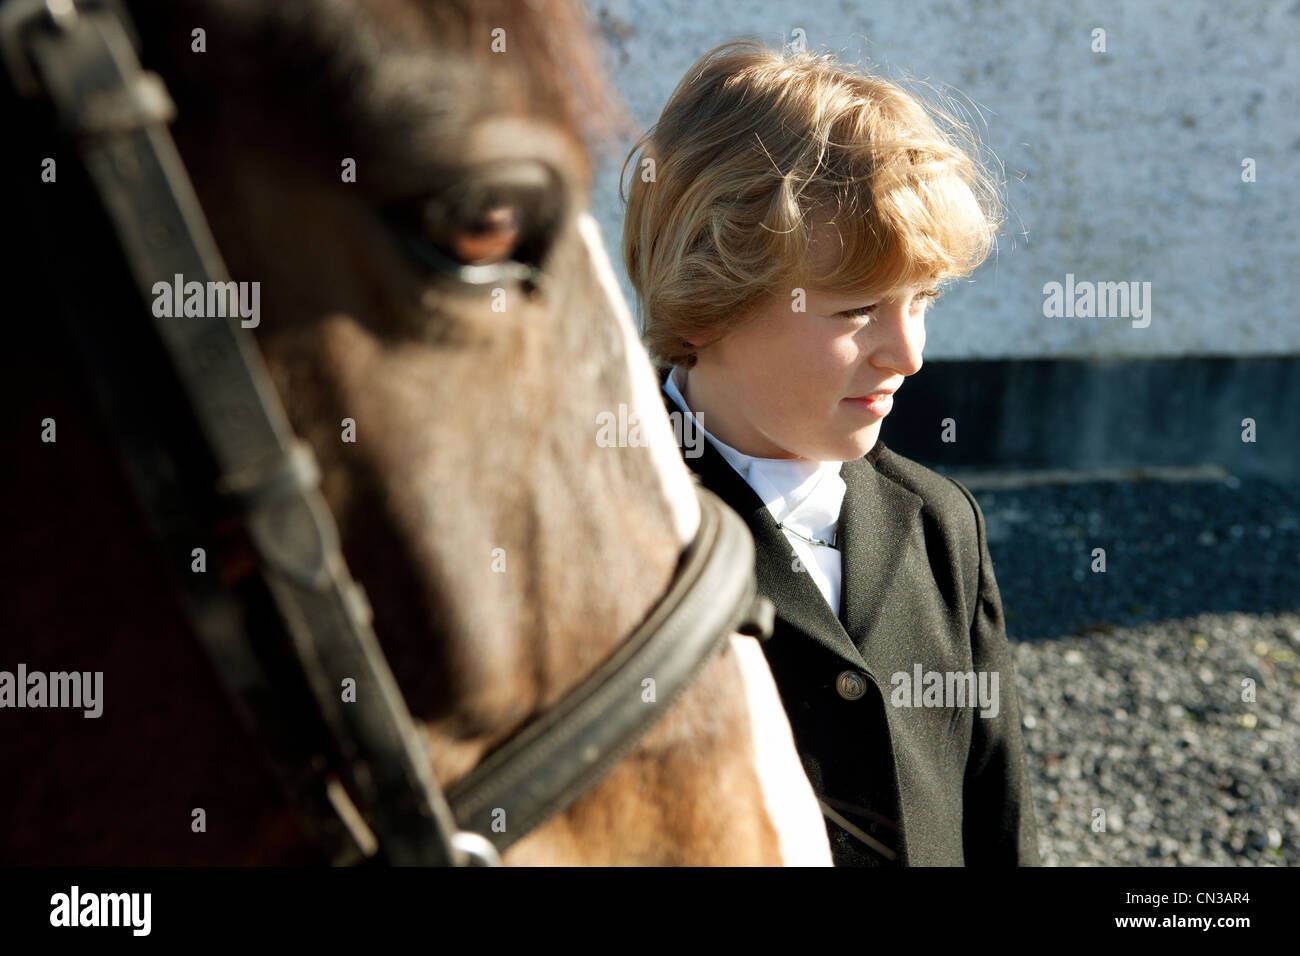 Boy standing with horse Stock Photo